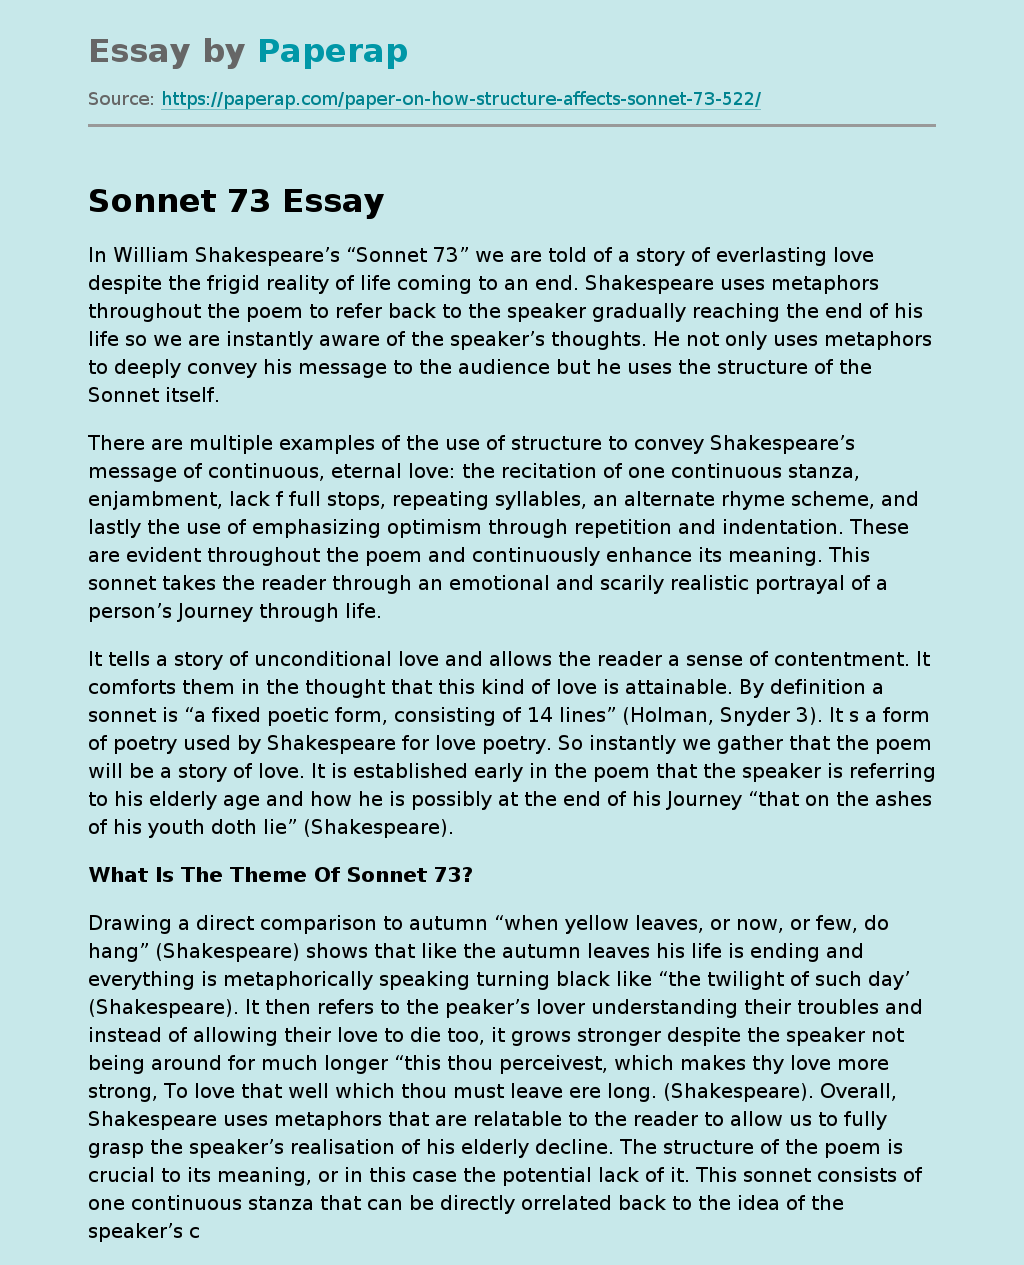 What Is The Theme Of Sonnet 73?